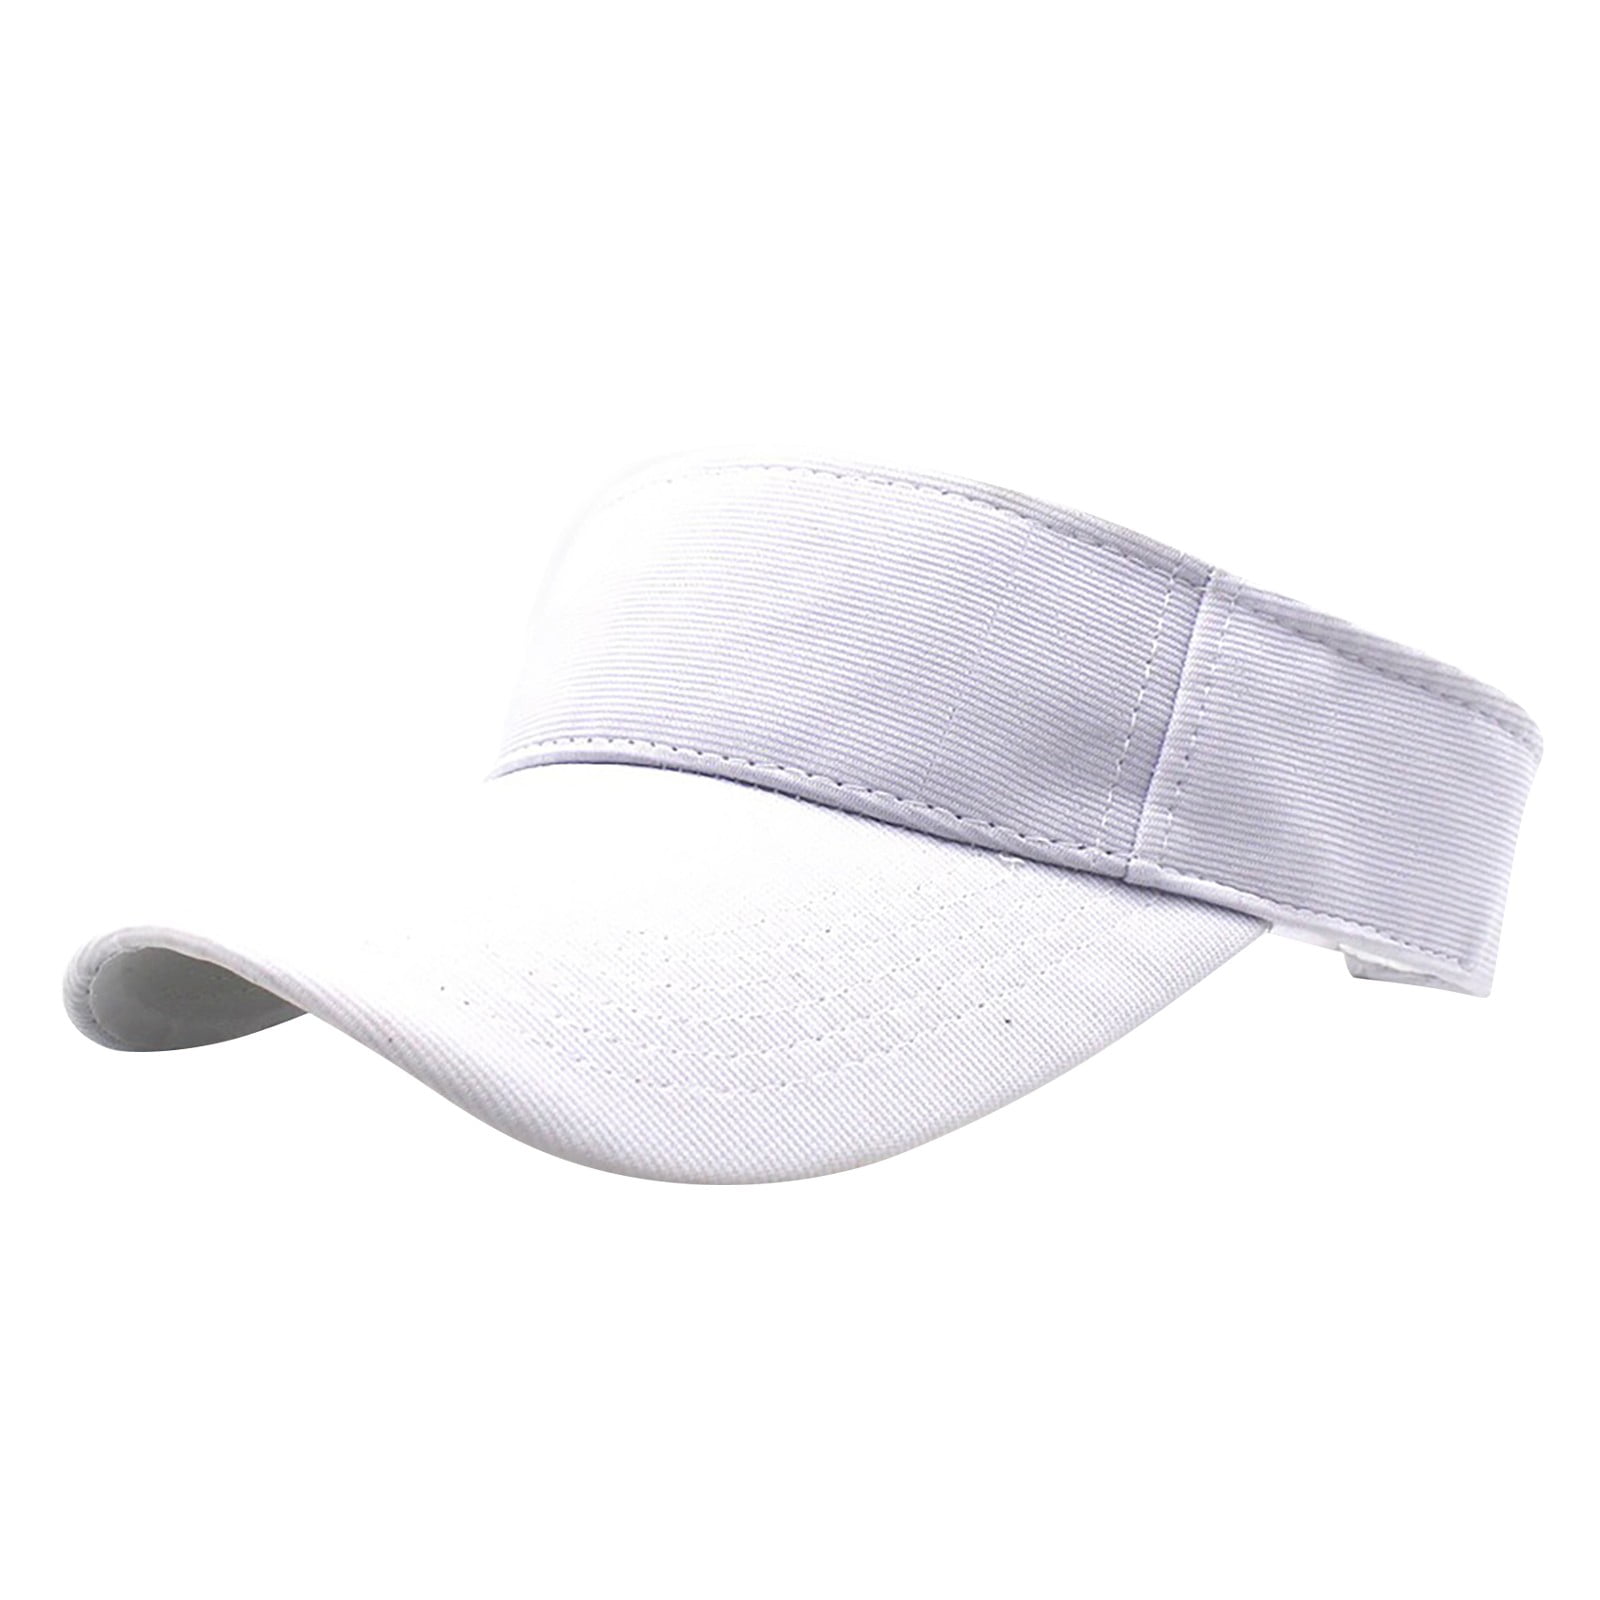 Pgeraug Visors Solid Cap Mesh Quick Drying Adjustable Breathable Sport  Outdoor Sun Protection Adjustable Sun Hats for Women White 